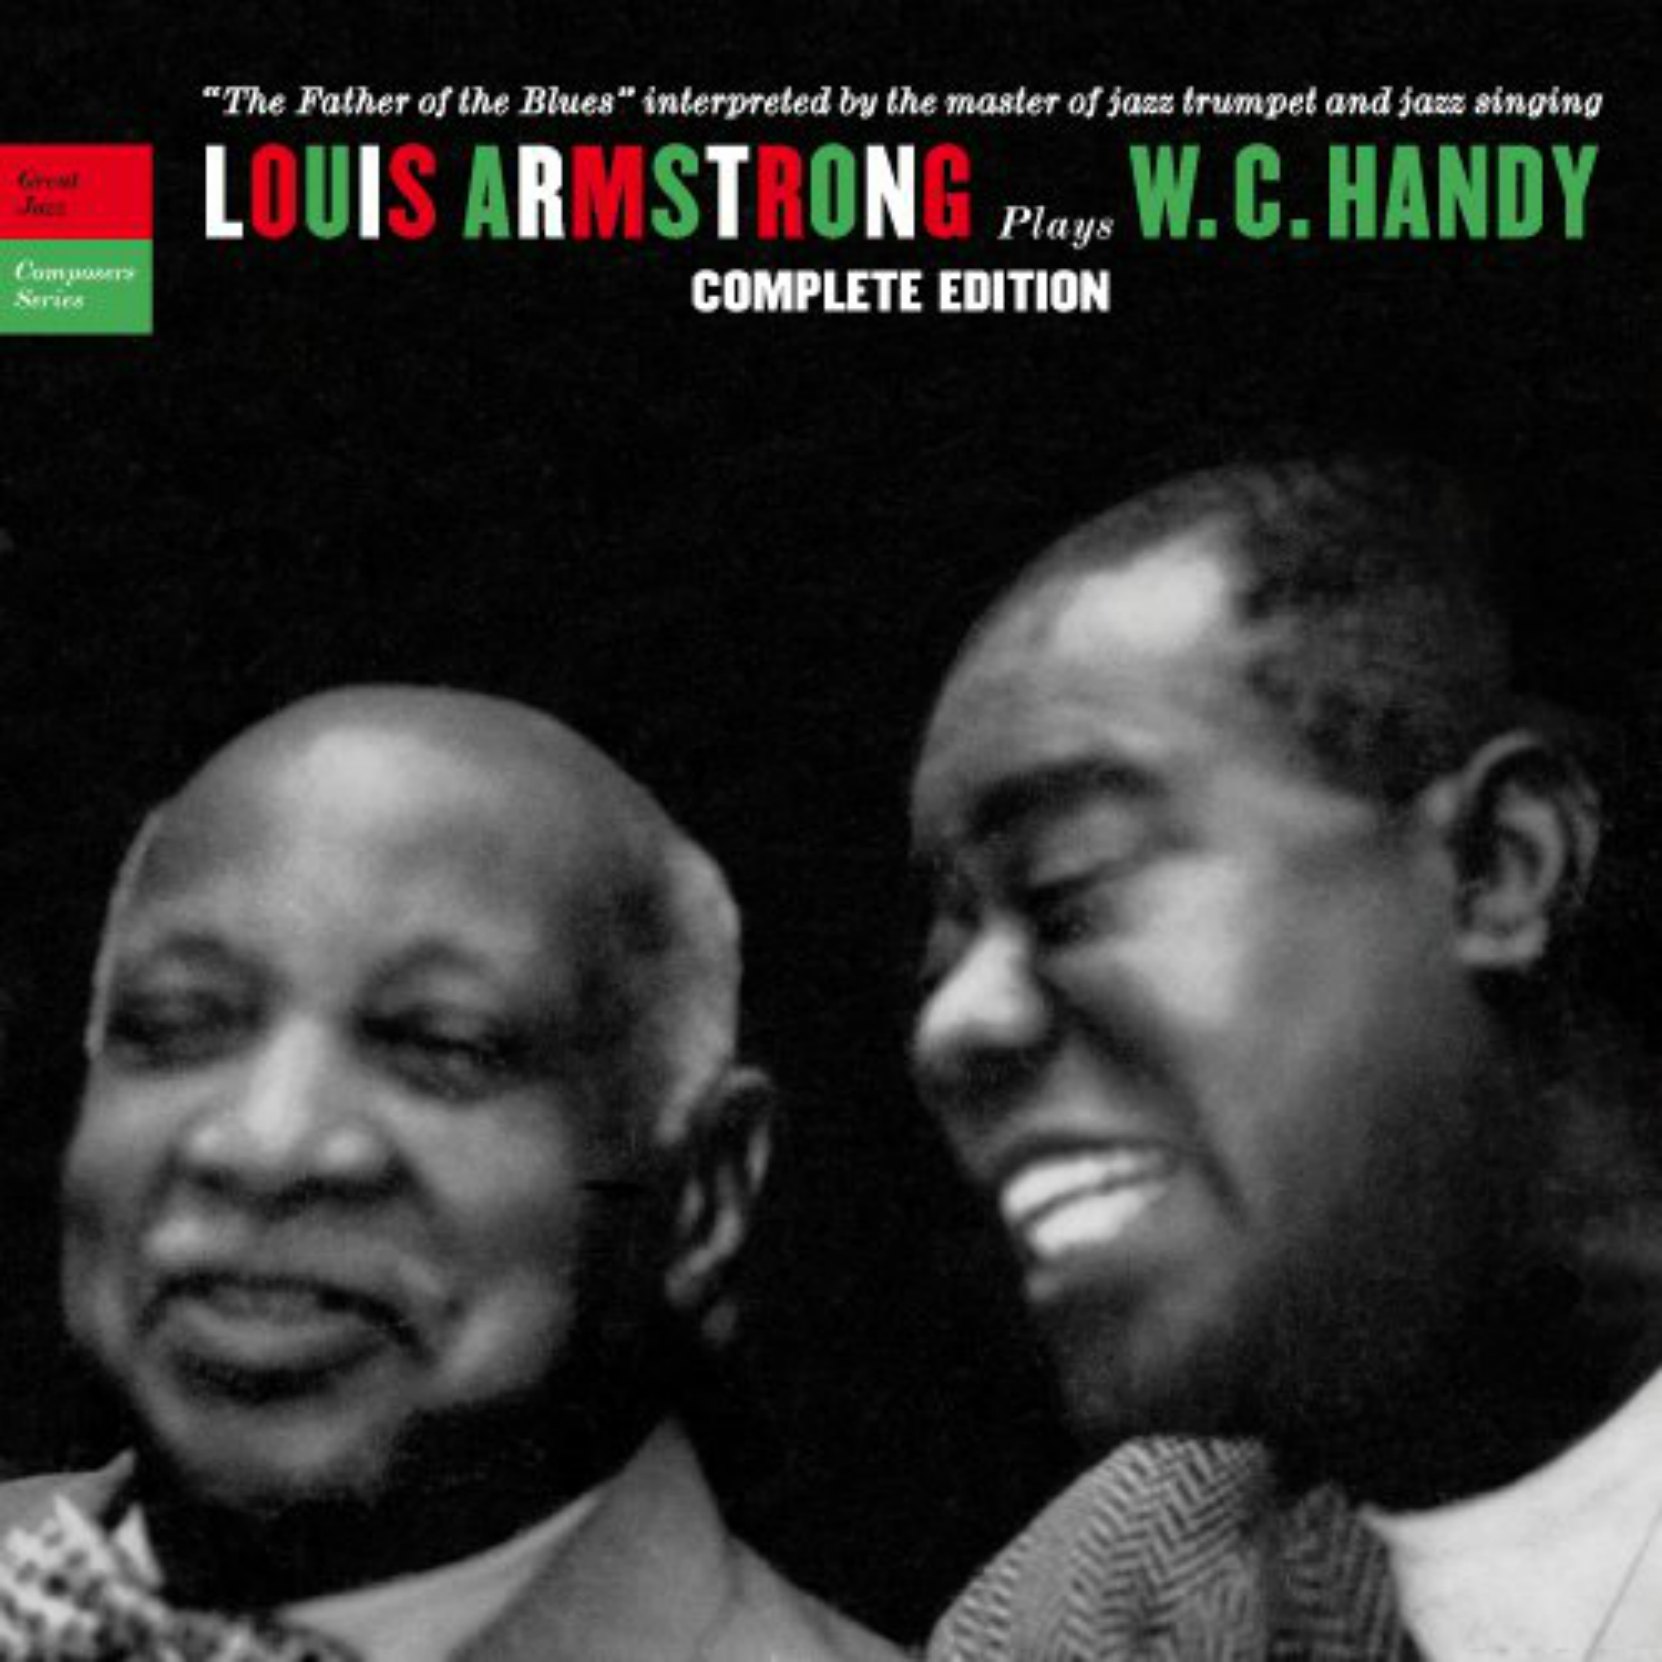 CD cover, Louis Armstrong Plays W.C. Handy, Complete Edition. 2 CD set